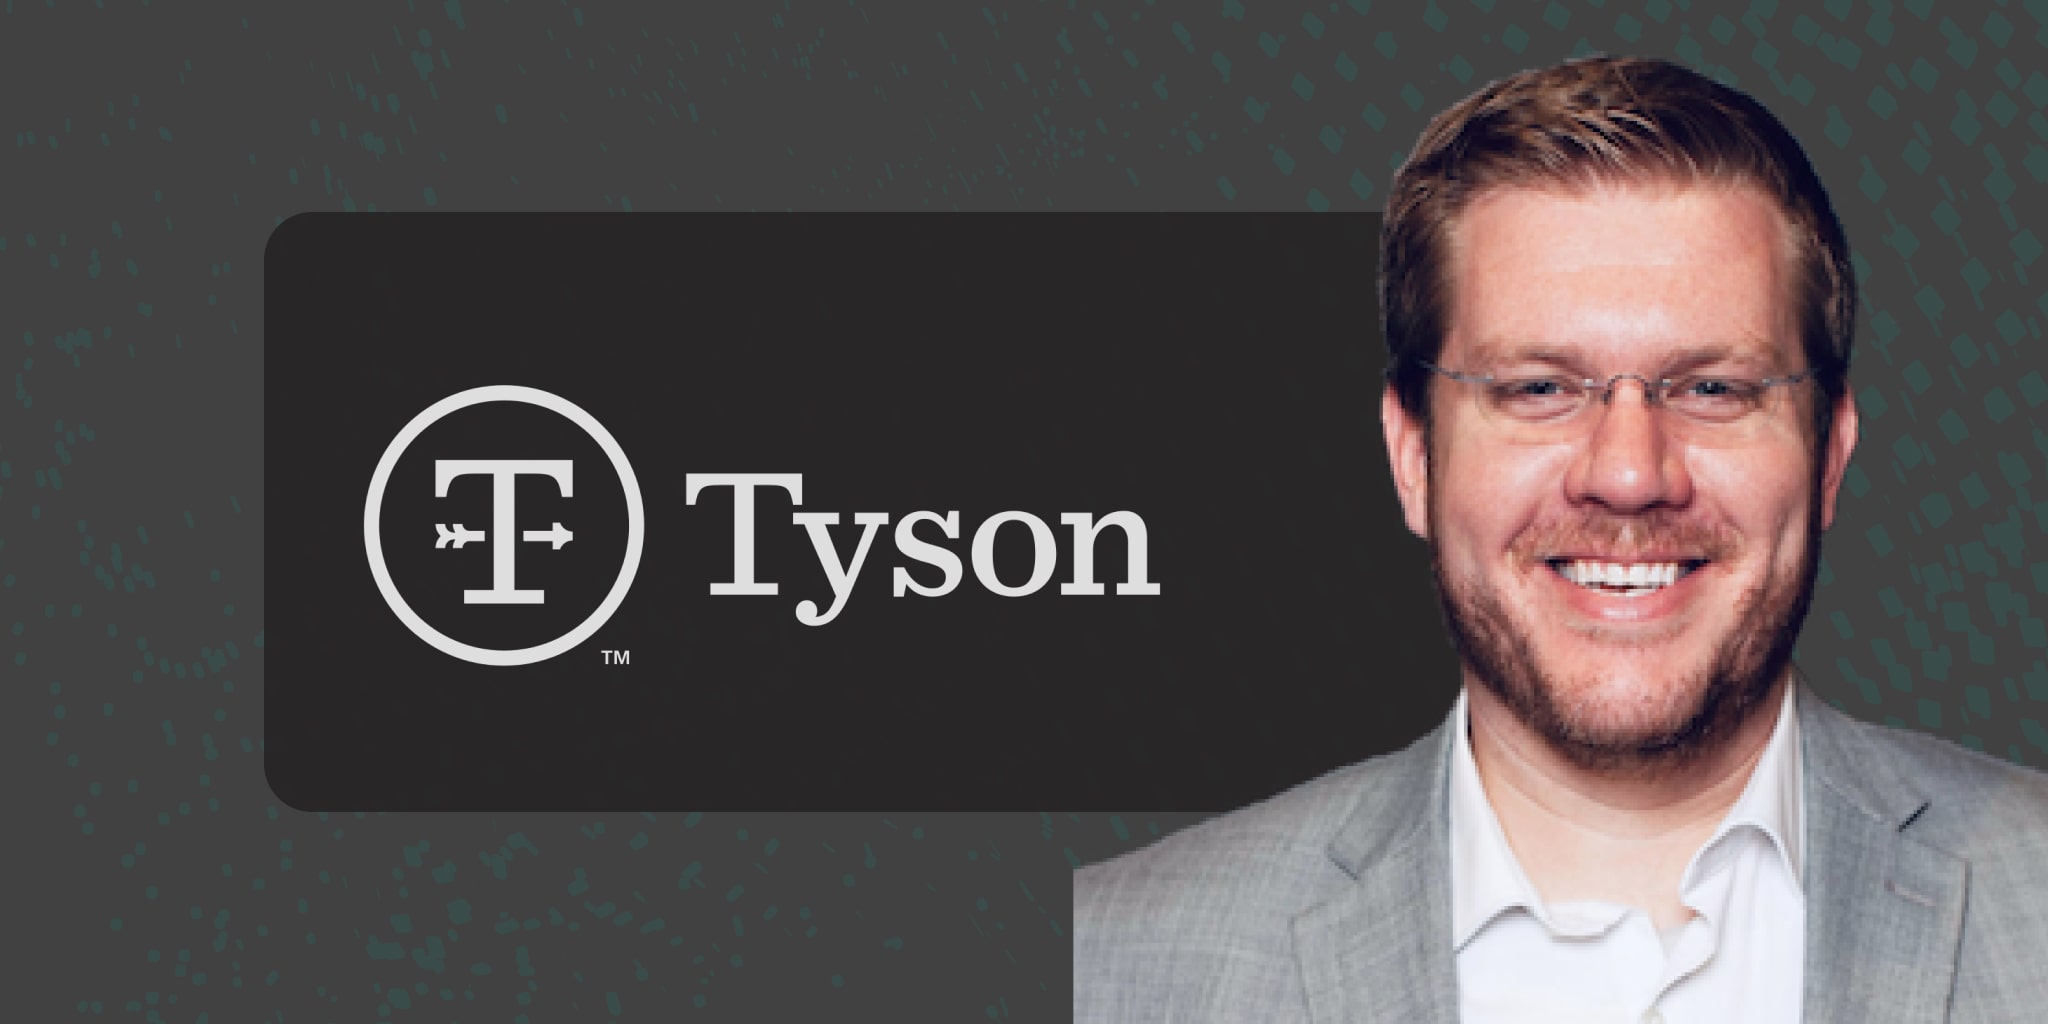 Tyson Logo With Chad Wahlquist, Director Of Data Strategy & Technology